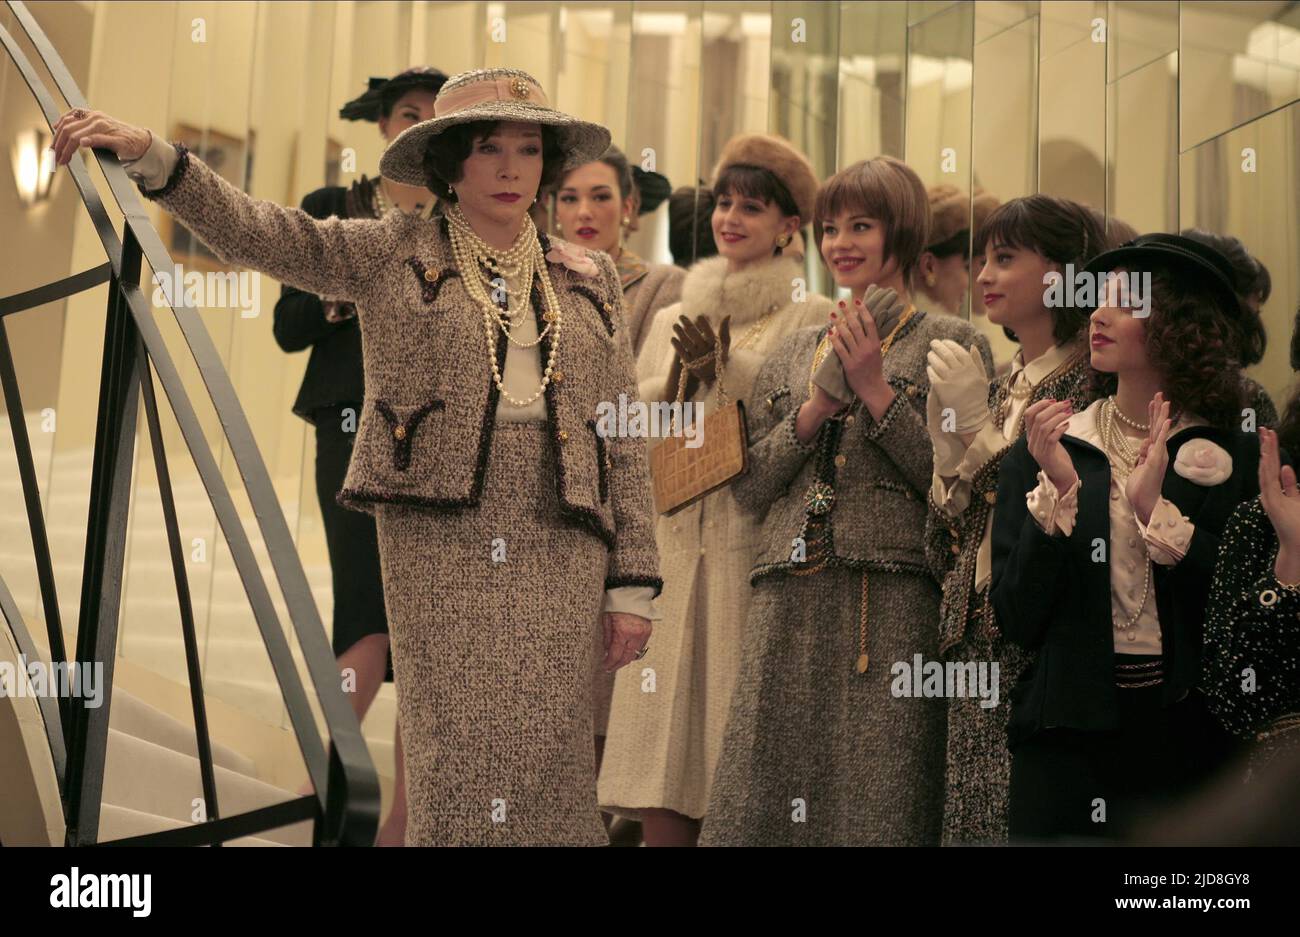 SHIRLEY MACLAINE, COCO CHANEL, 2008, Banque D'Images